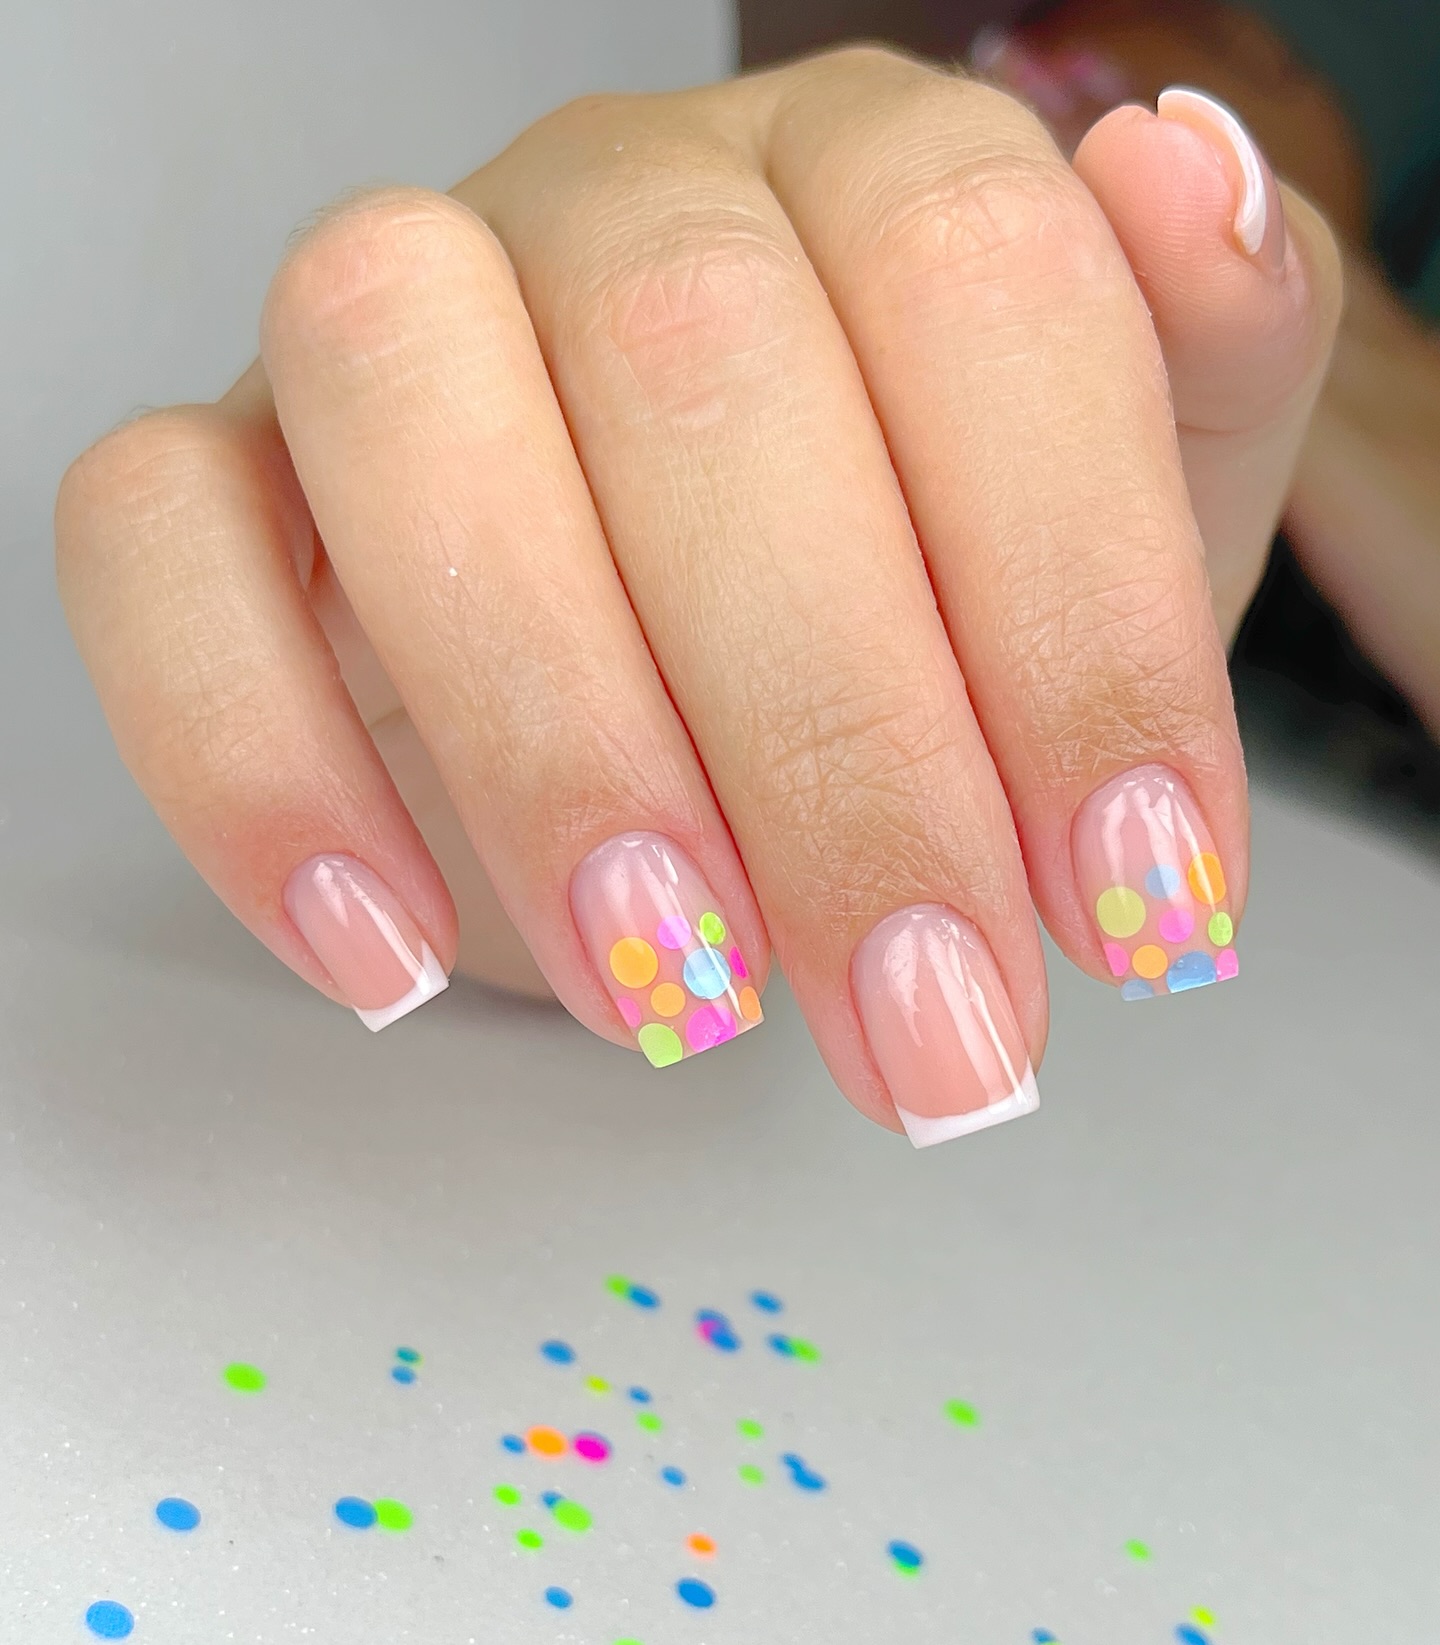 Playful French Manicure with Confetti Dots